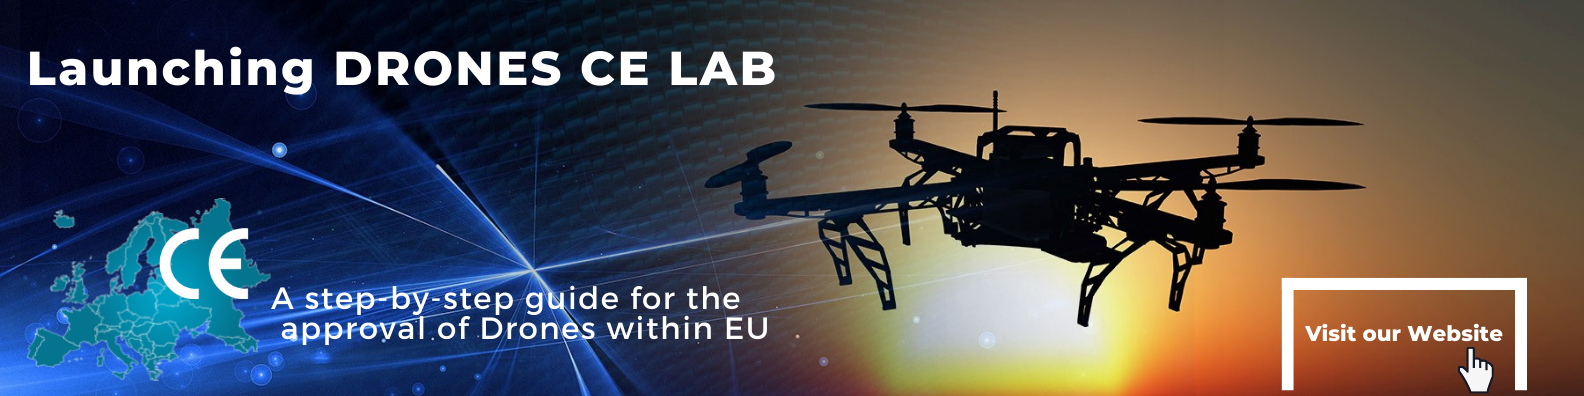 DRONES CE LAB, the new guide for drone manufacturers